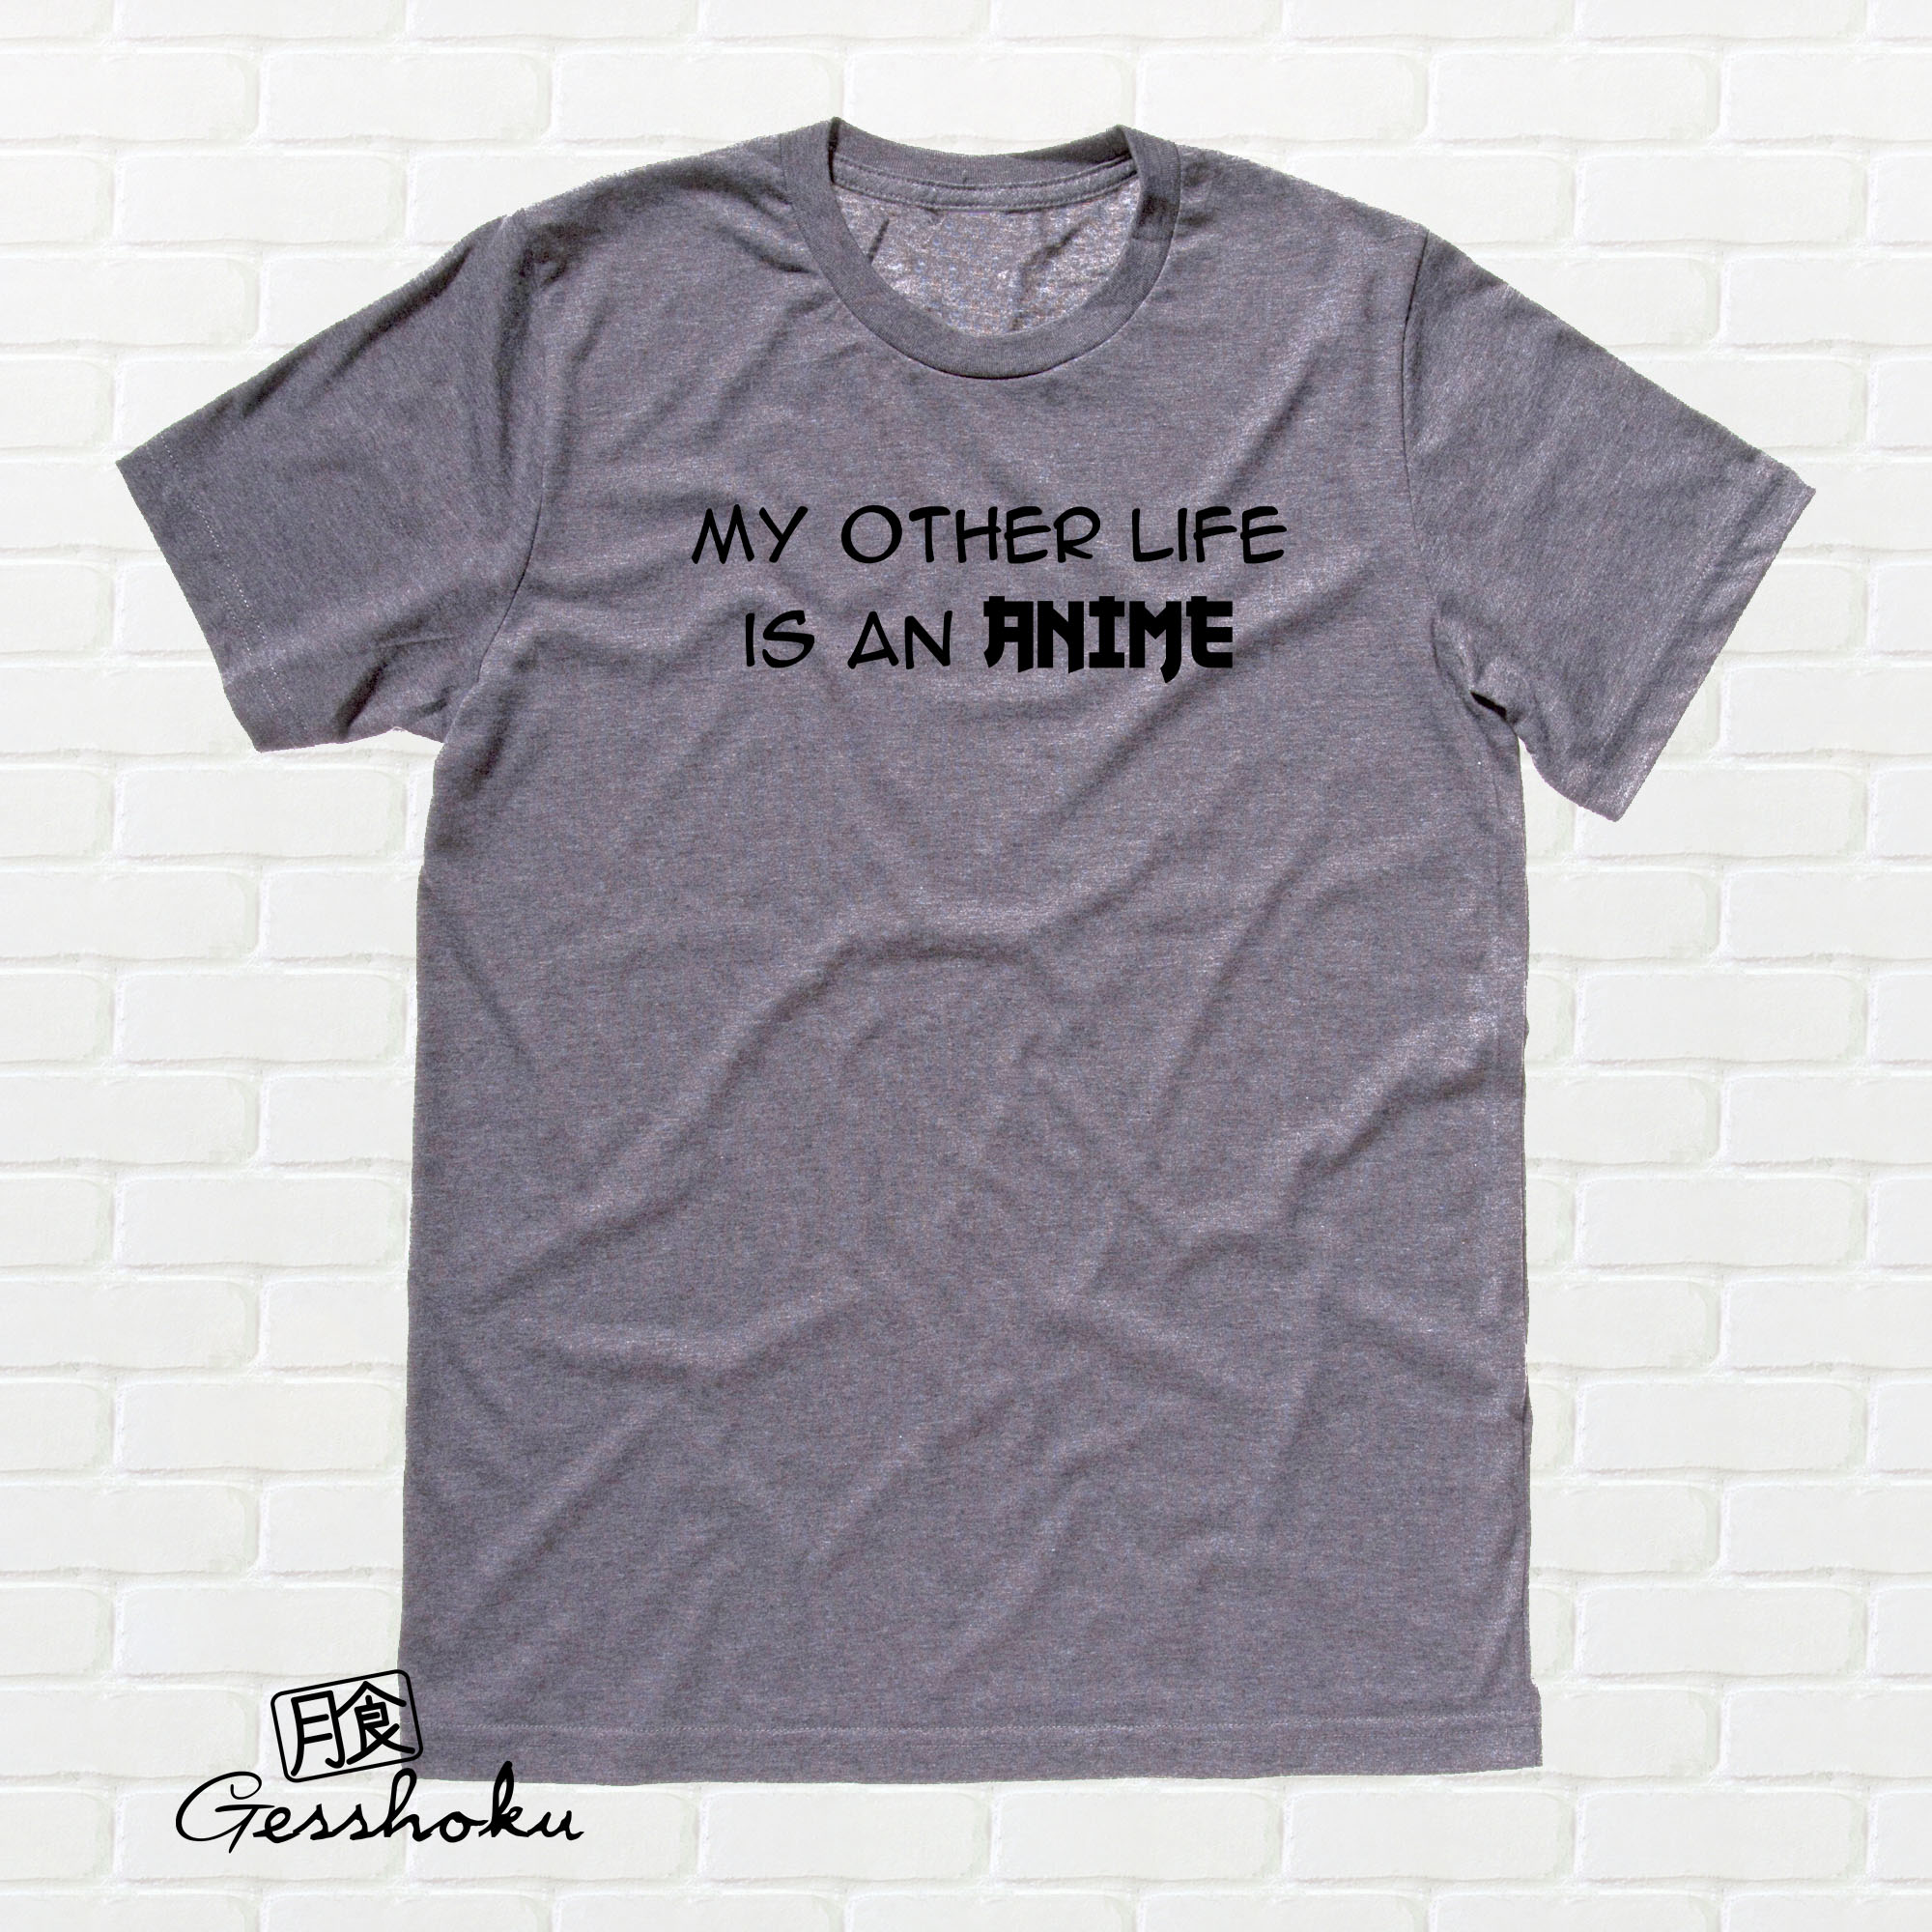 My Other Life is an Anime T-shirt - Charcoal Grey